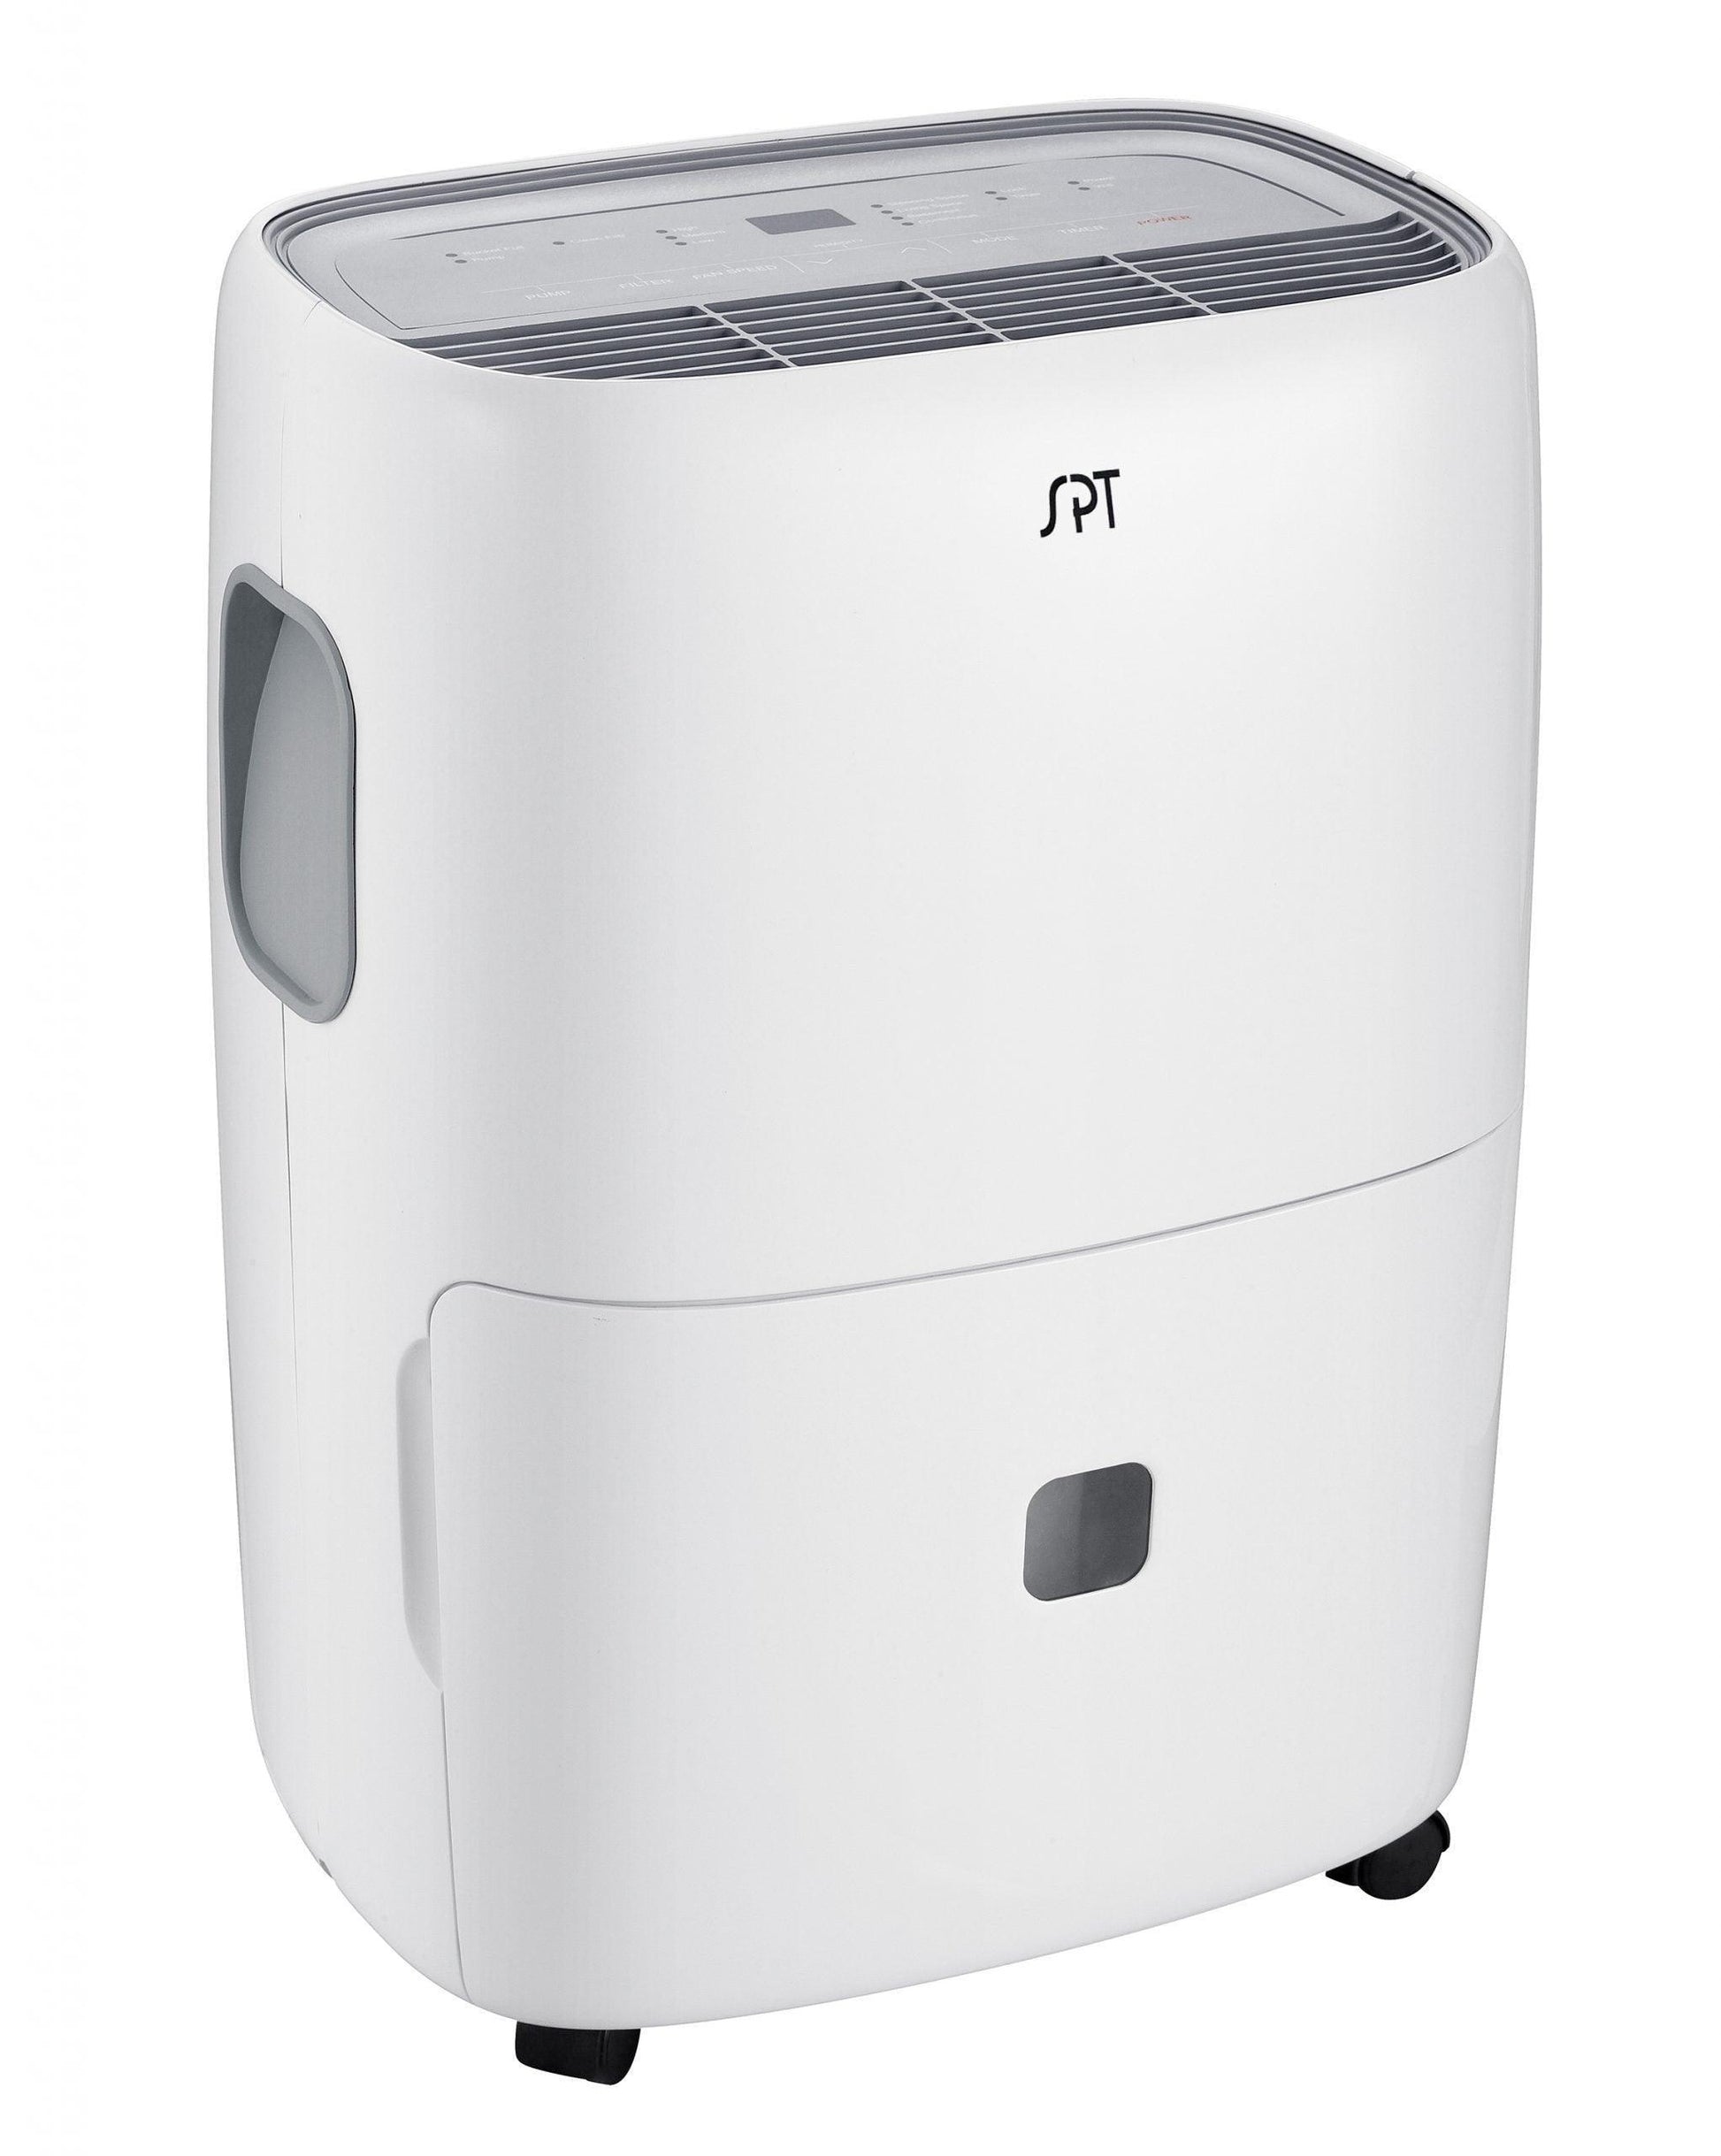 50-Pint Dehumidifier with ENERGY STAR and Built-in Pump SKU SD-54PE - Elite Air Purifiers